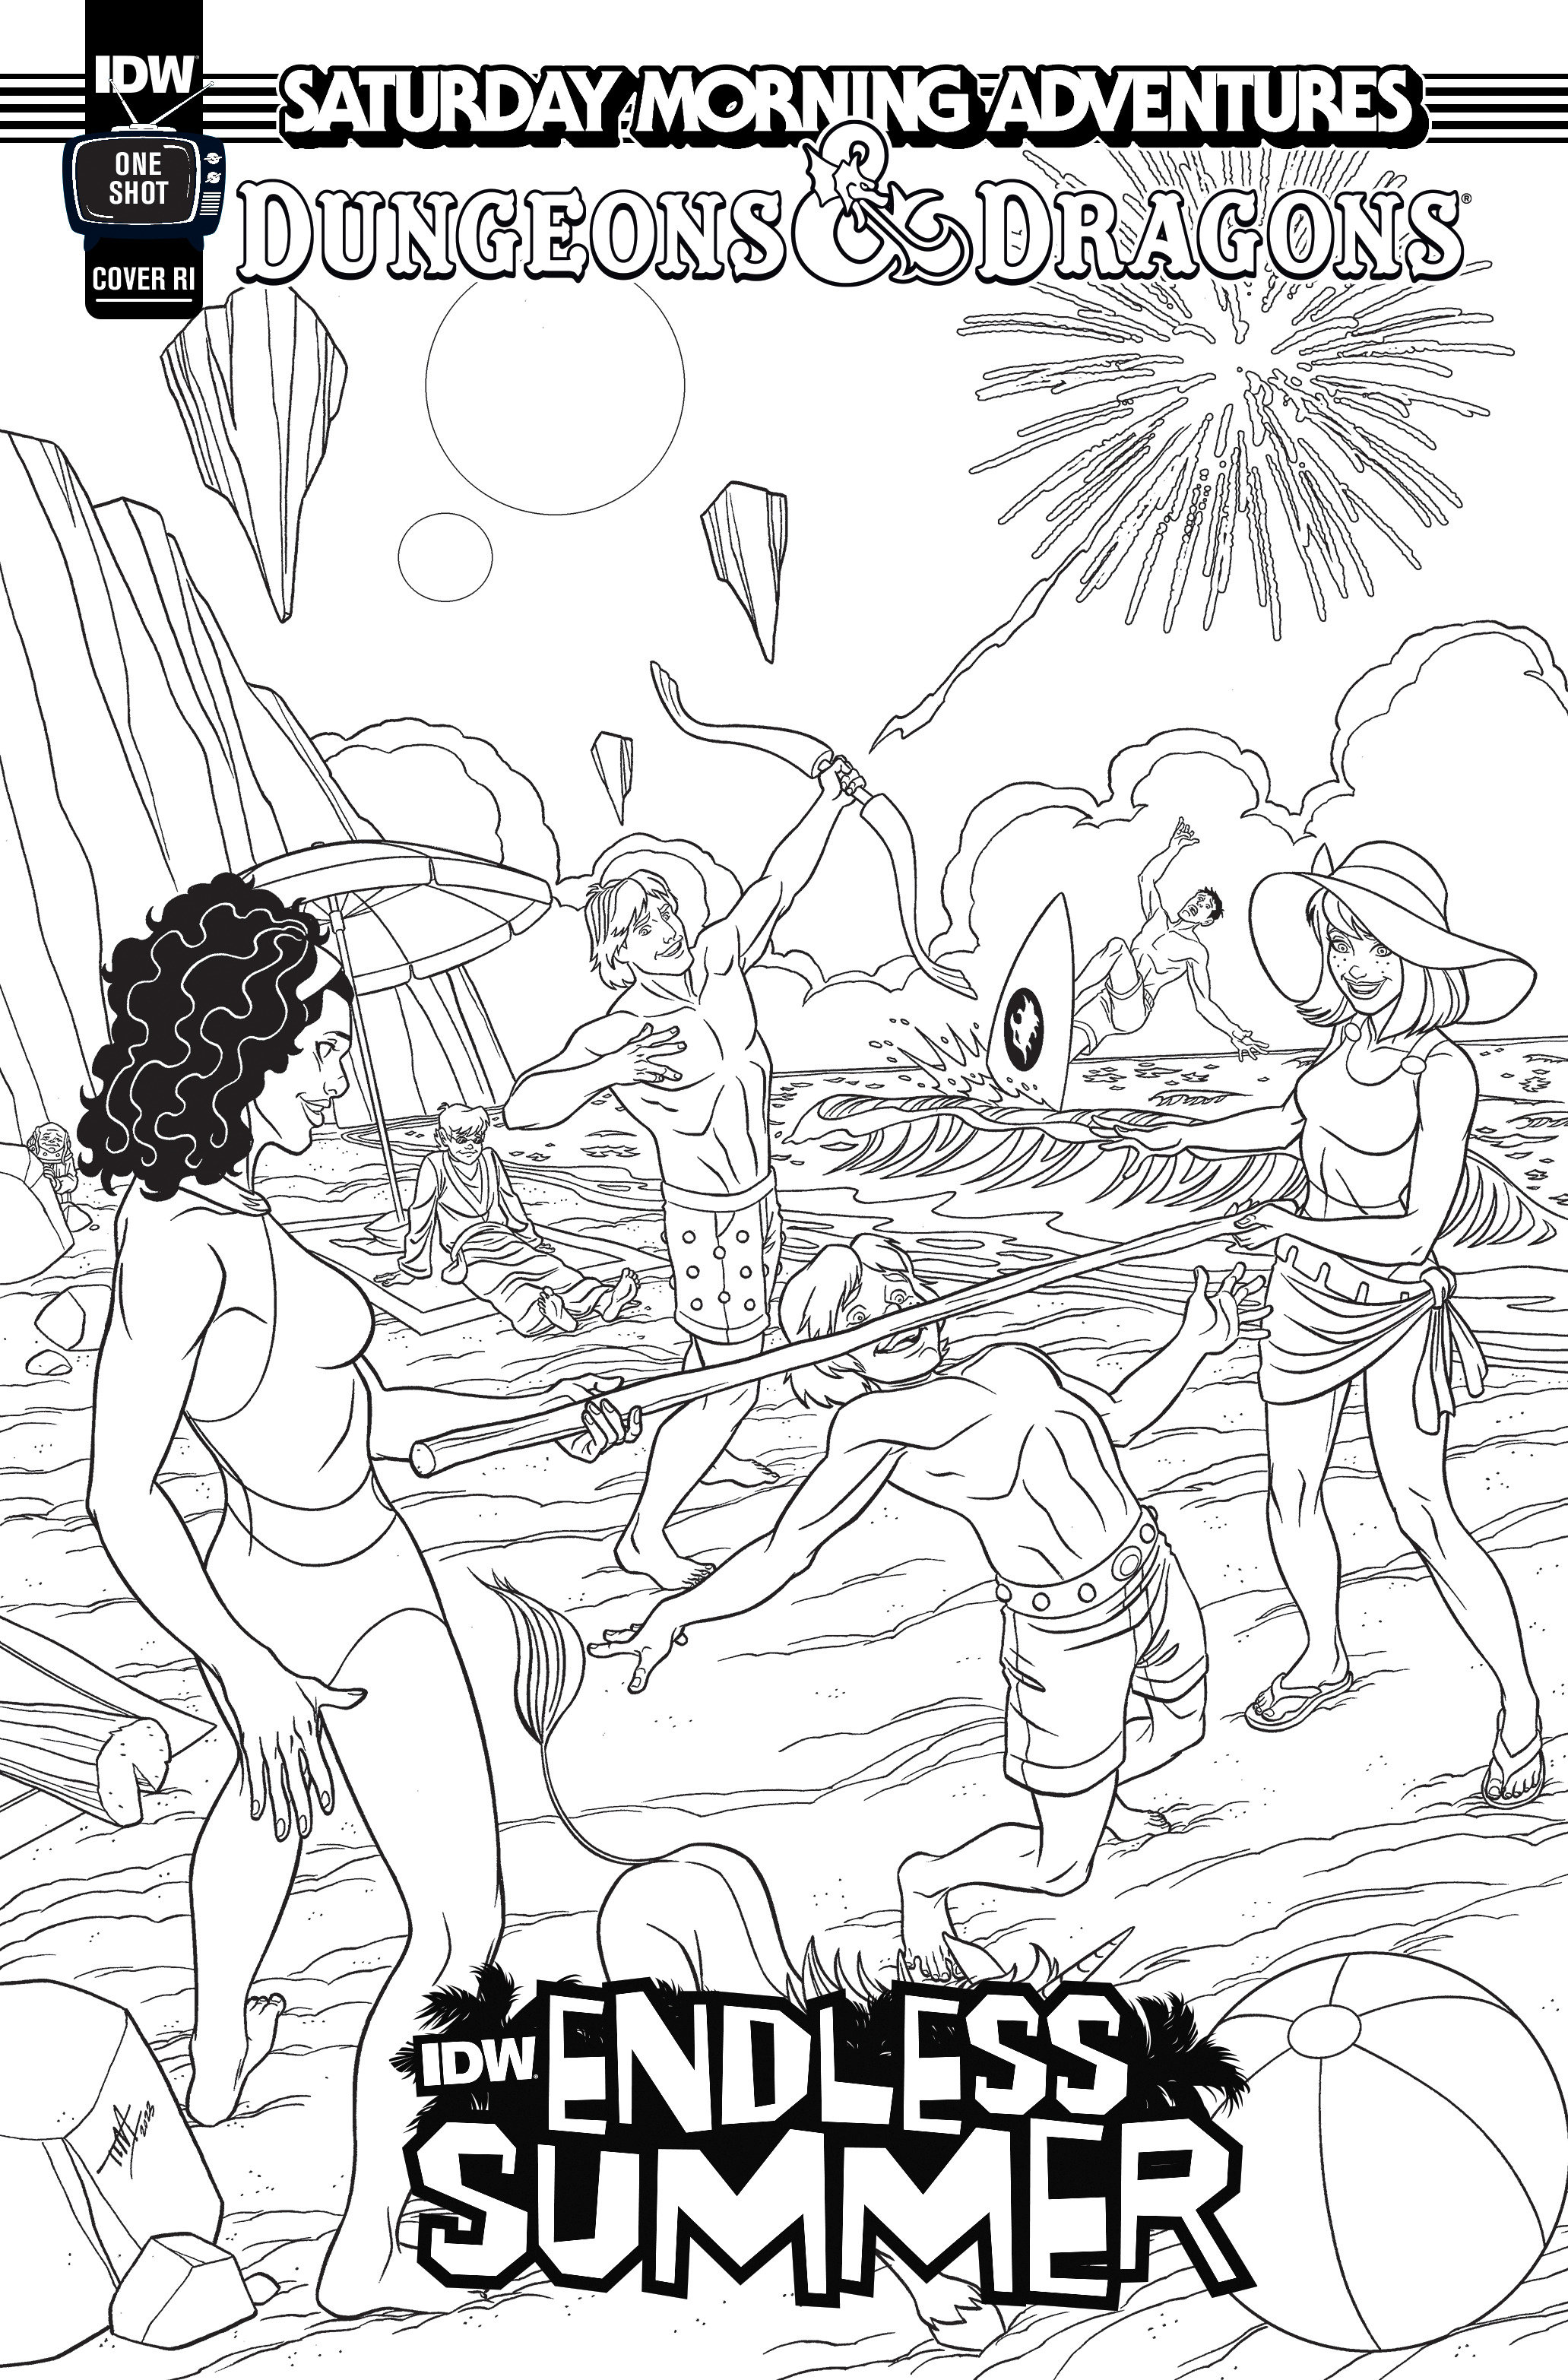 IDW Endless Summer—Dungeons & Dragons Saturday Morning Adventures Cover Retailer Incentive Coloring Book 1 for 10 Incentive Variant